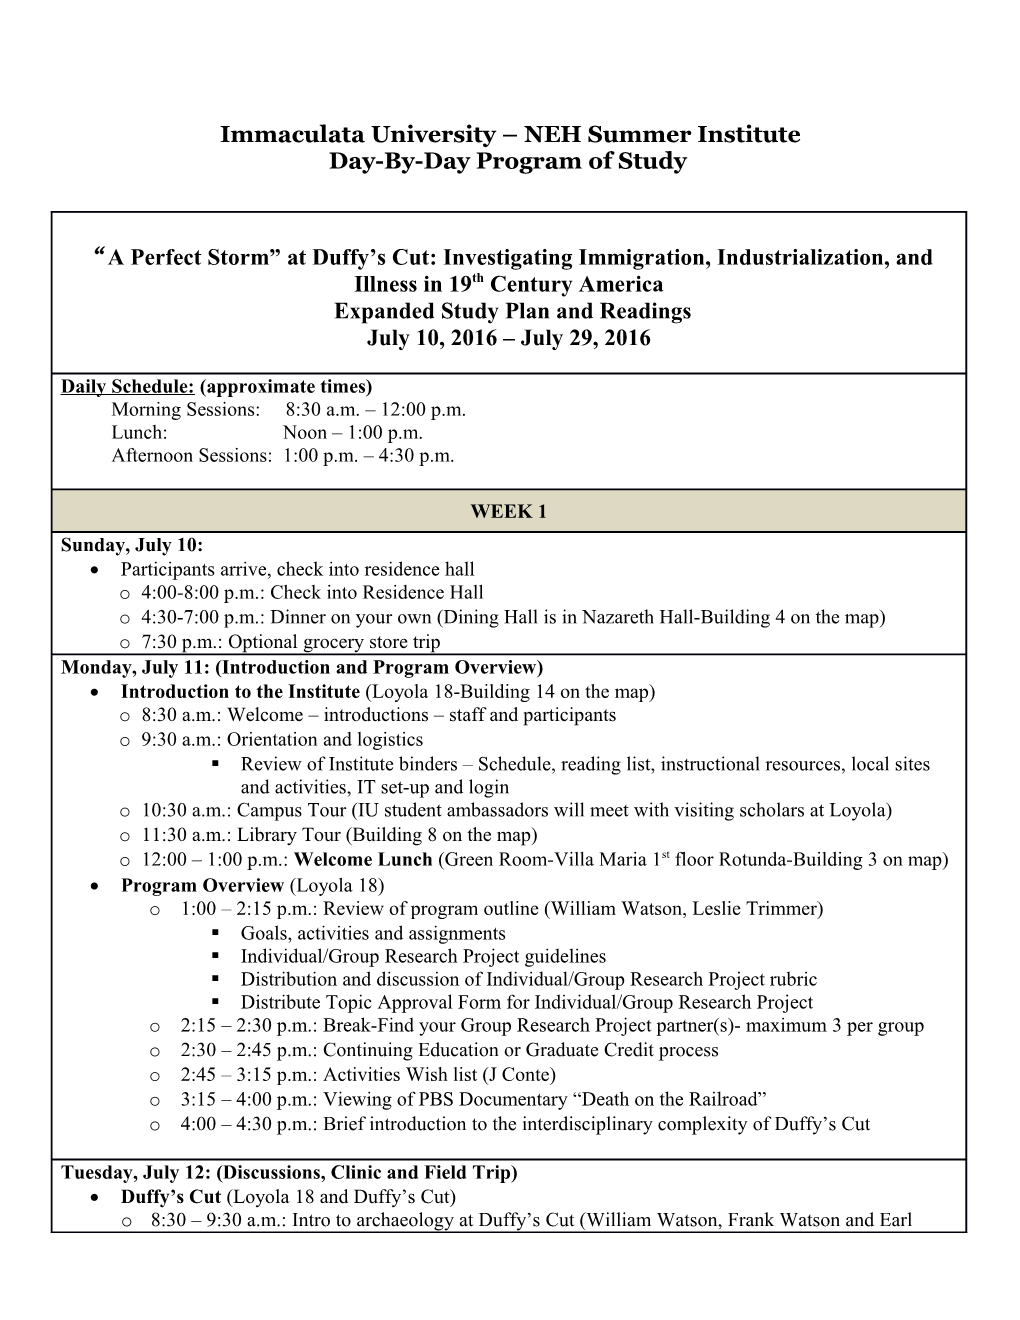 Day-By-Day Program of Study